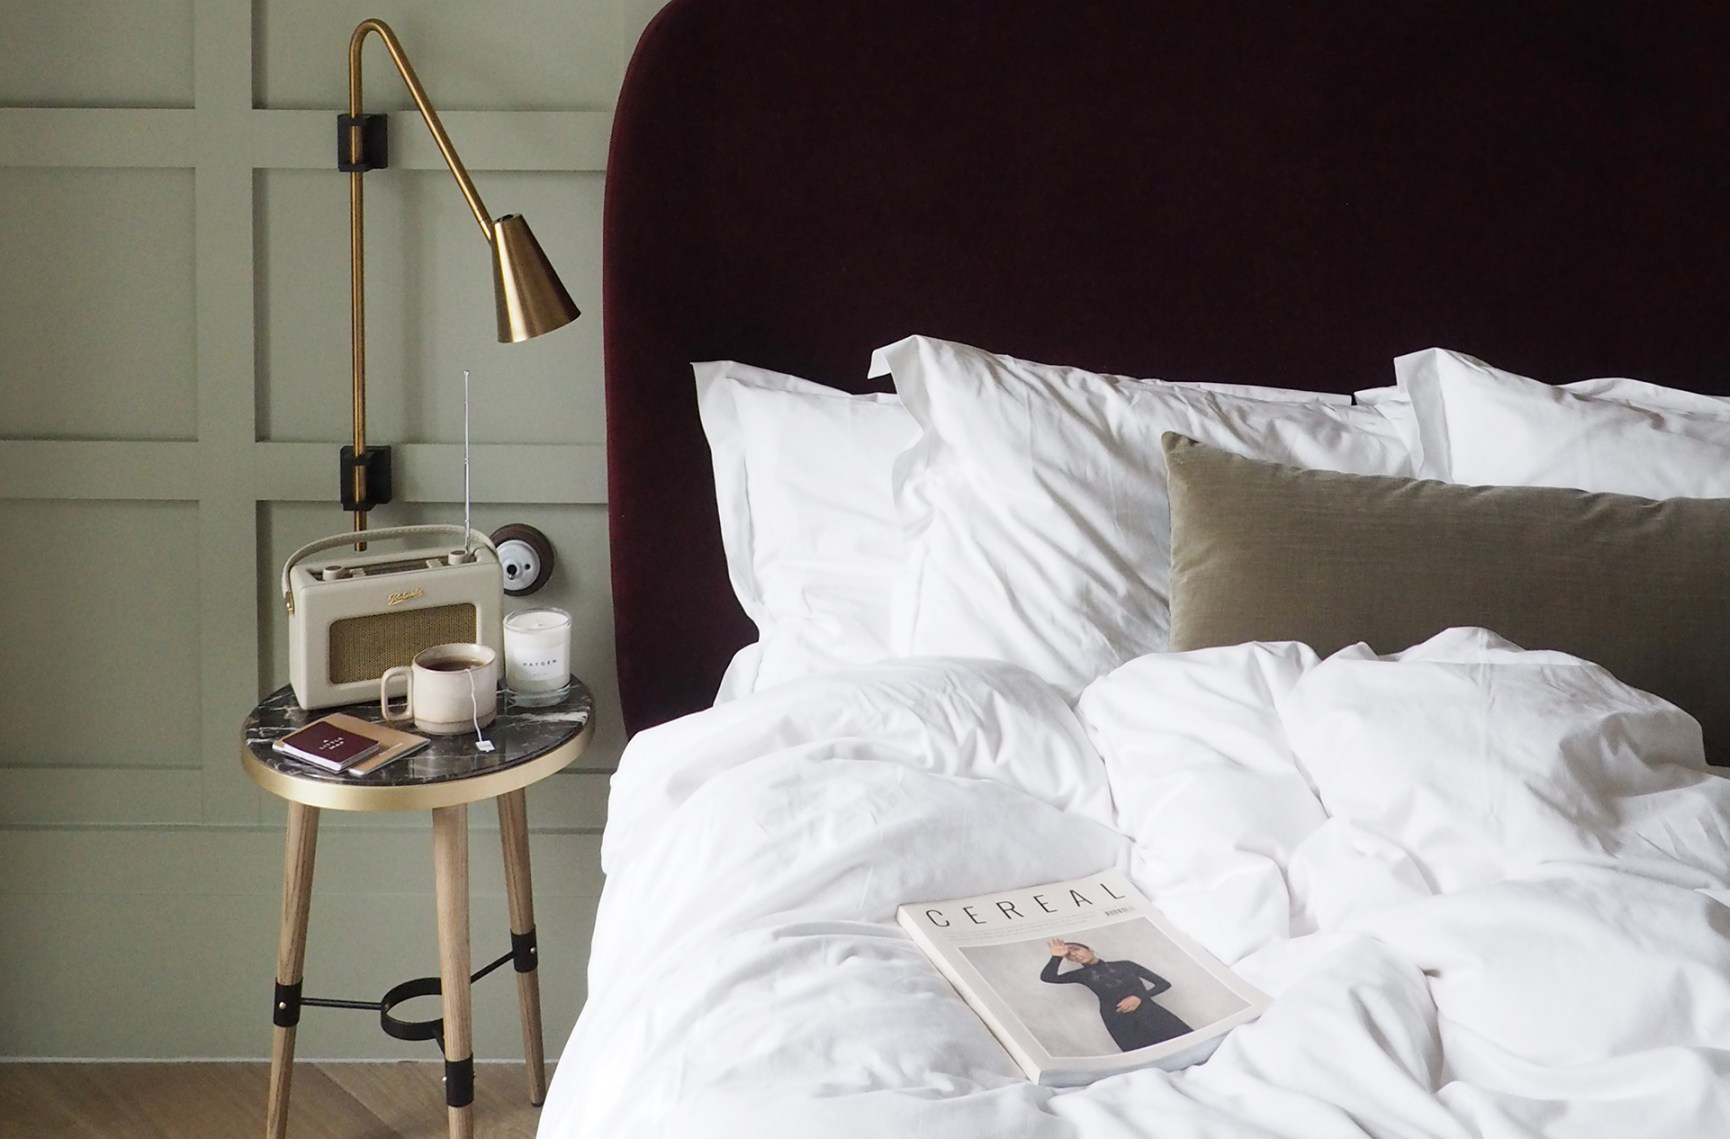 A bed with white sheets and a brass and marble side-table with a retro radio and a cup of tea